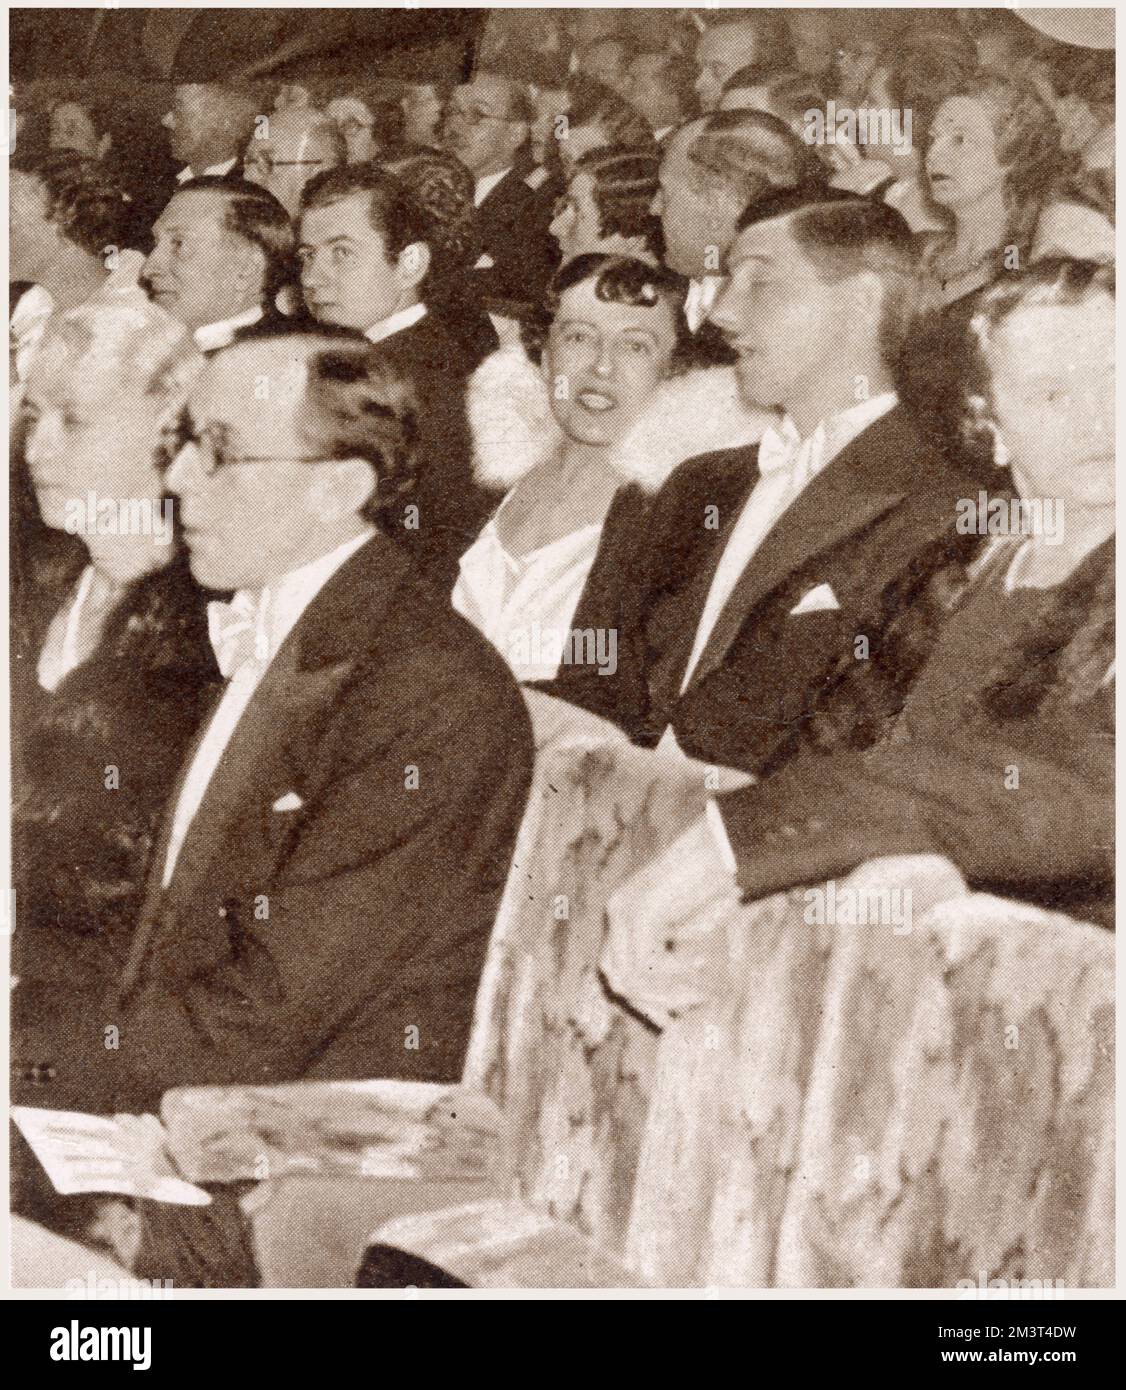 Dorothy Gladys (Dodie) Smith (1896 - 1990), English novelist and playwright, author of the plays 'Autumn Crocus' and 'Dear Octopus' and the books, 'I Capture the Castle' and 'One Hundred and One Dalmatians'. Pictured at the first night of the new Charles Cochran revue, 'Follow the Sun' at the Adelphi Theatre. Seen third from right in the second row. Stock Photo